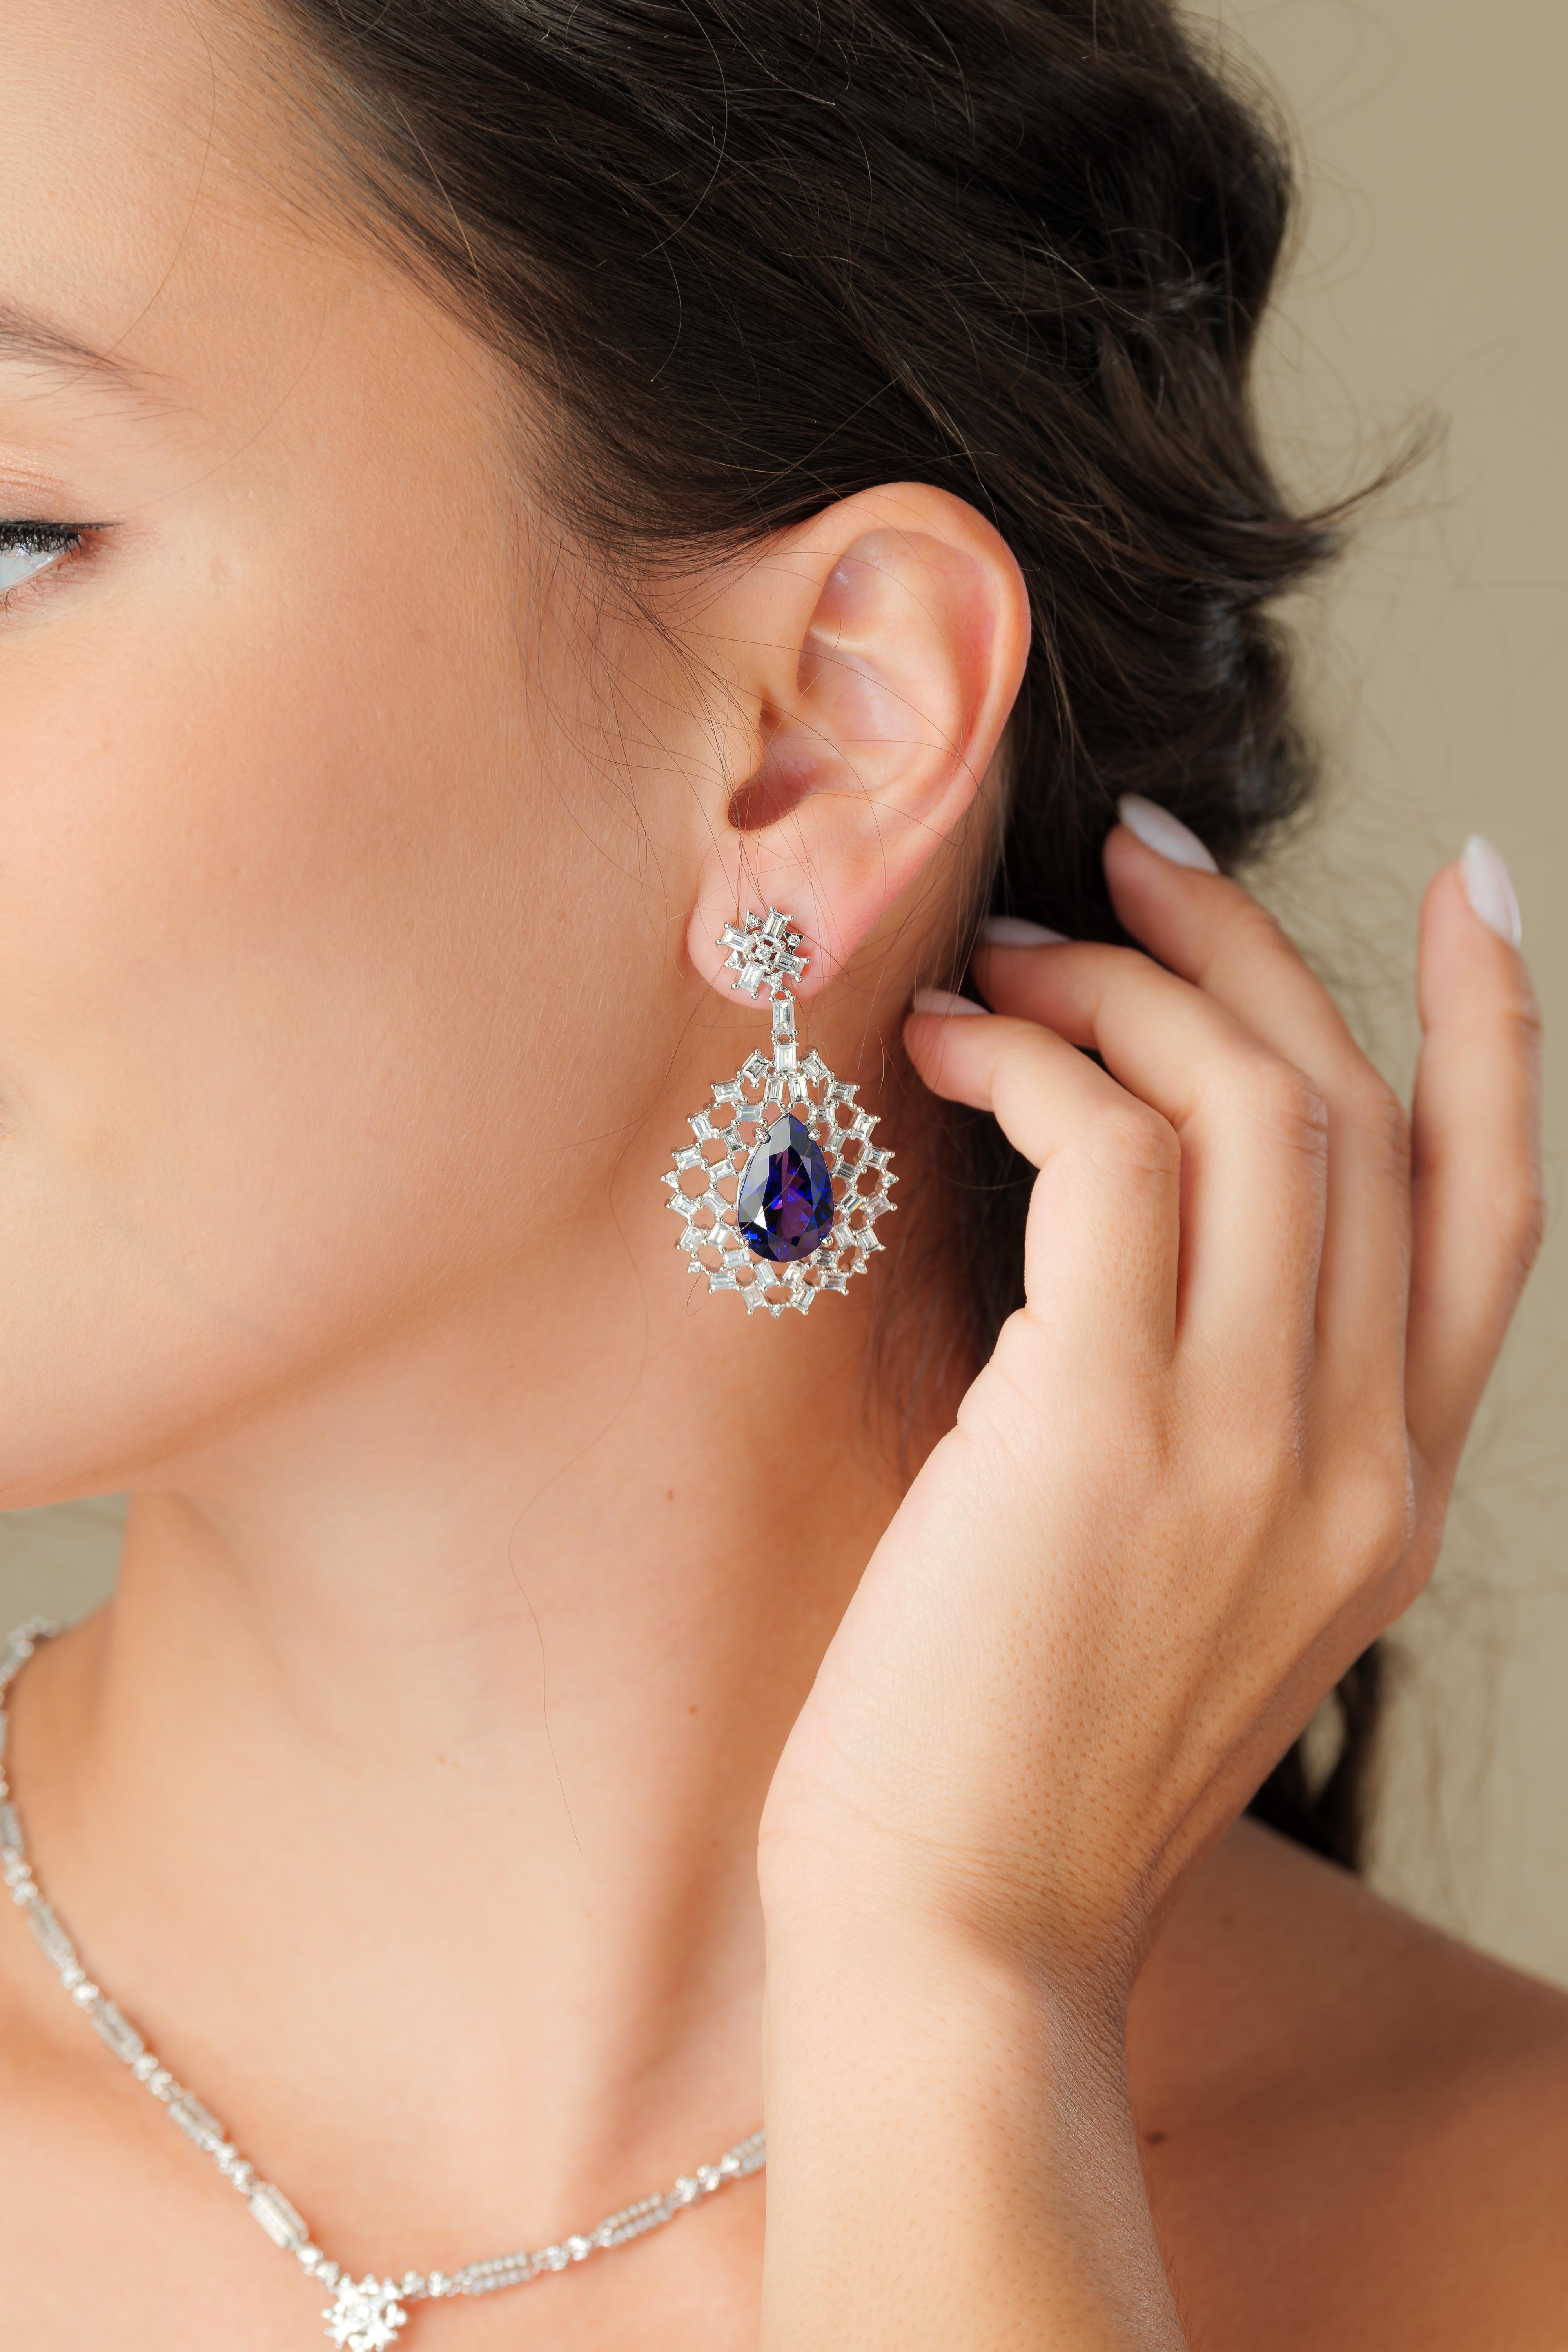 Snowflake Tanzanites! This collection features elegant pear shaped Taznzanites that are encompassed by a cage of baguette cut icy white diamonds set in white gold.

Snowflake tanzanite and diamond earrings in 18K white gold. 

Tanzanite: 18.85 carat